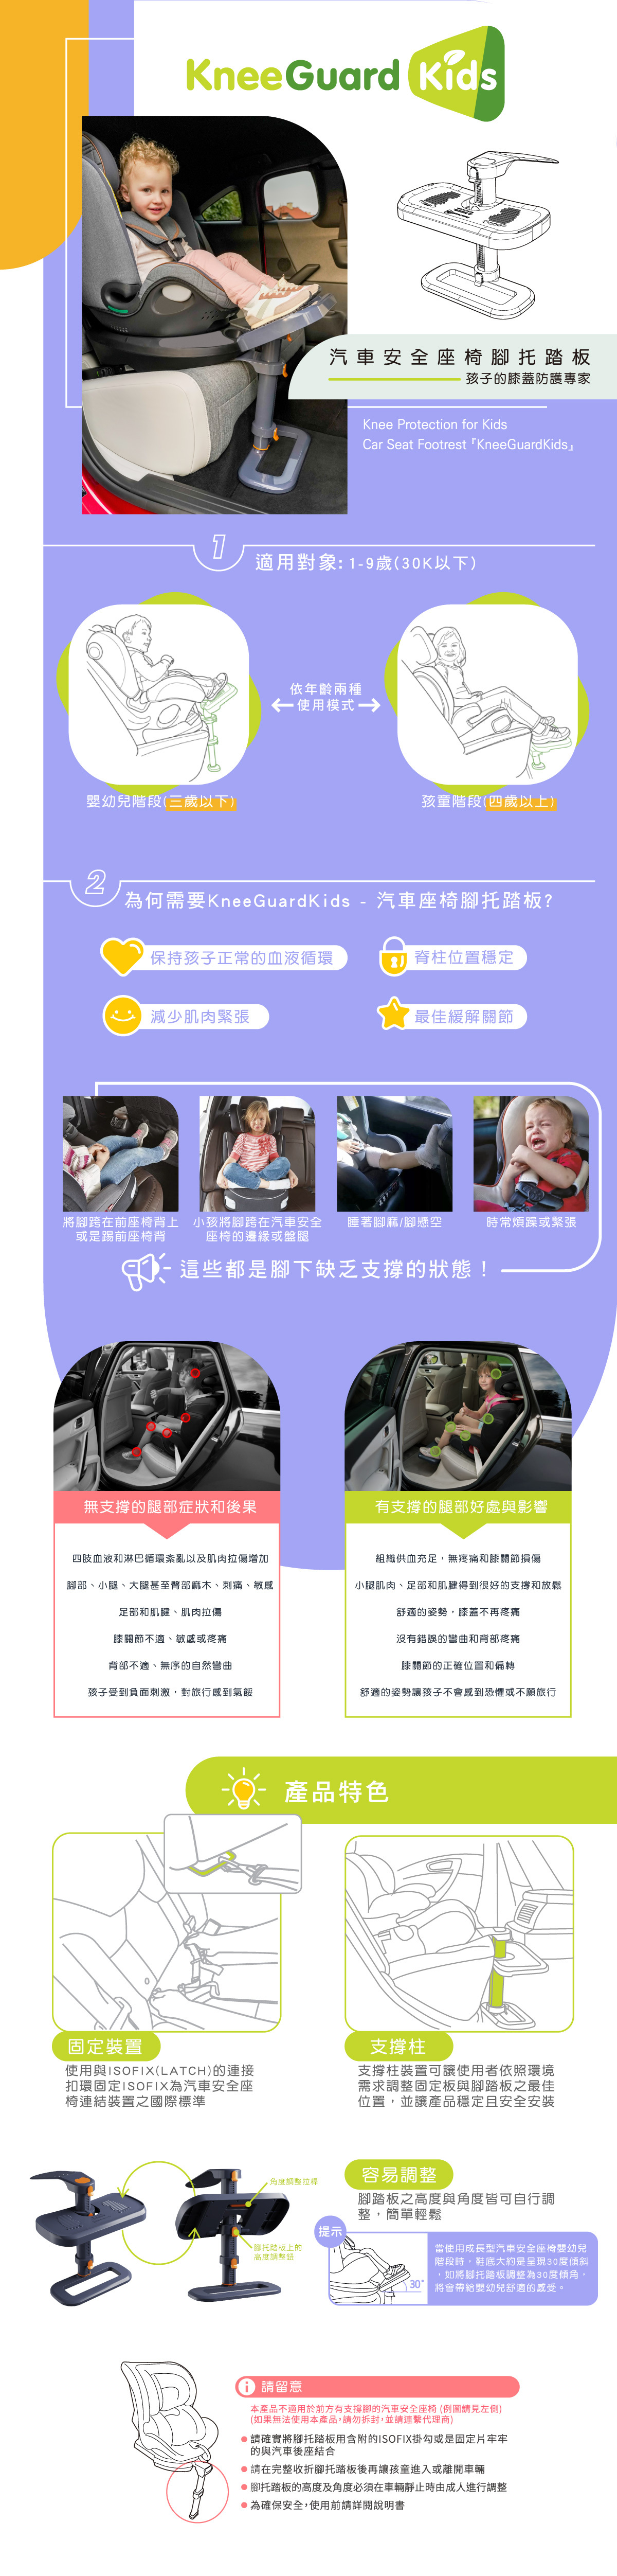 【KneeGuardKids】Child safety seat auxiliary pedal fourth generation